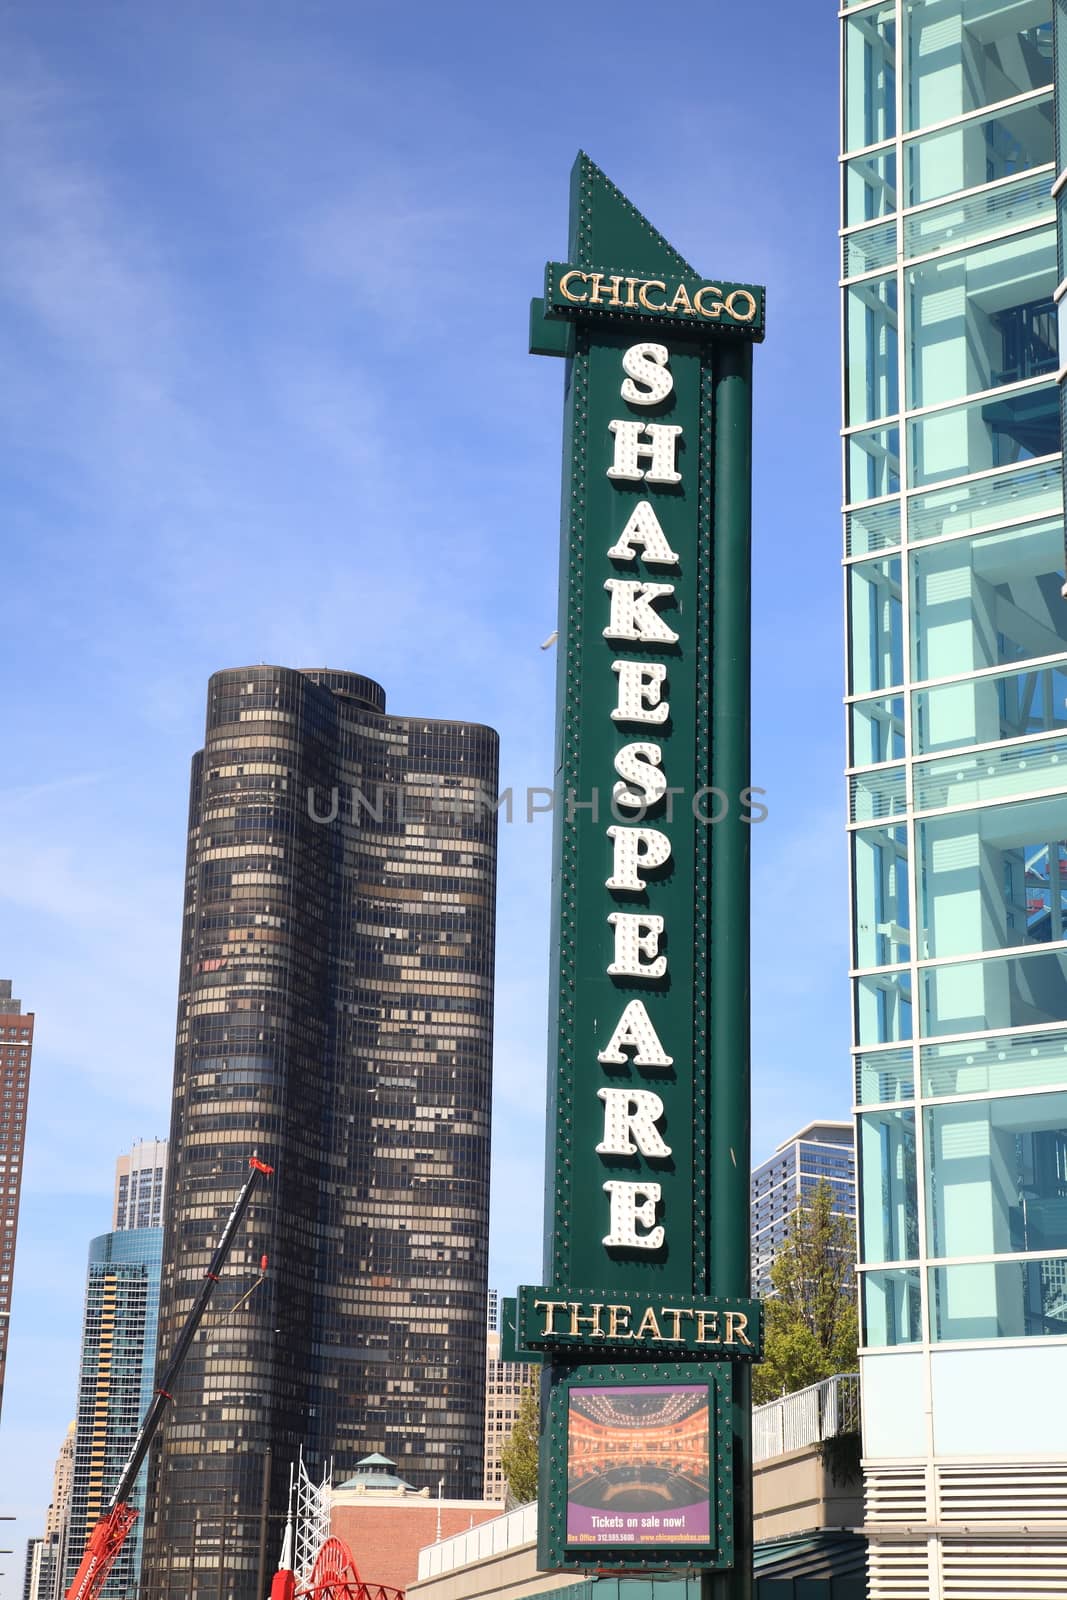 Famous marquee of the Shakespeare Theater in downtown Chicago, Illinois.